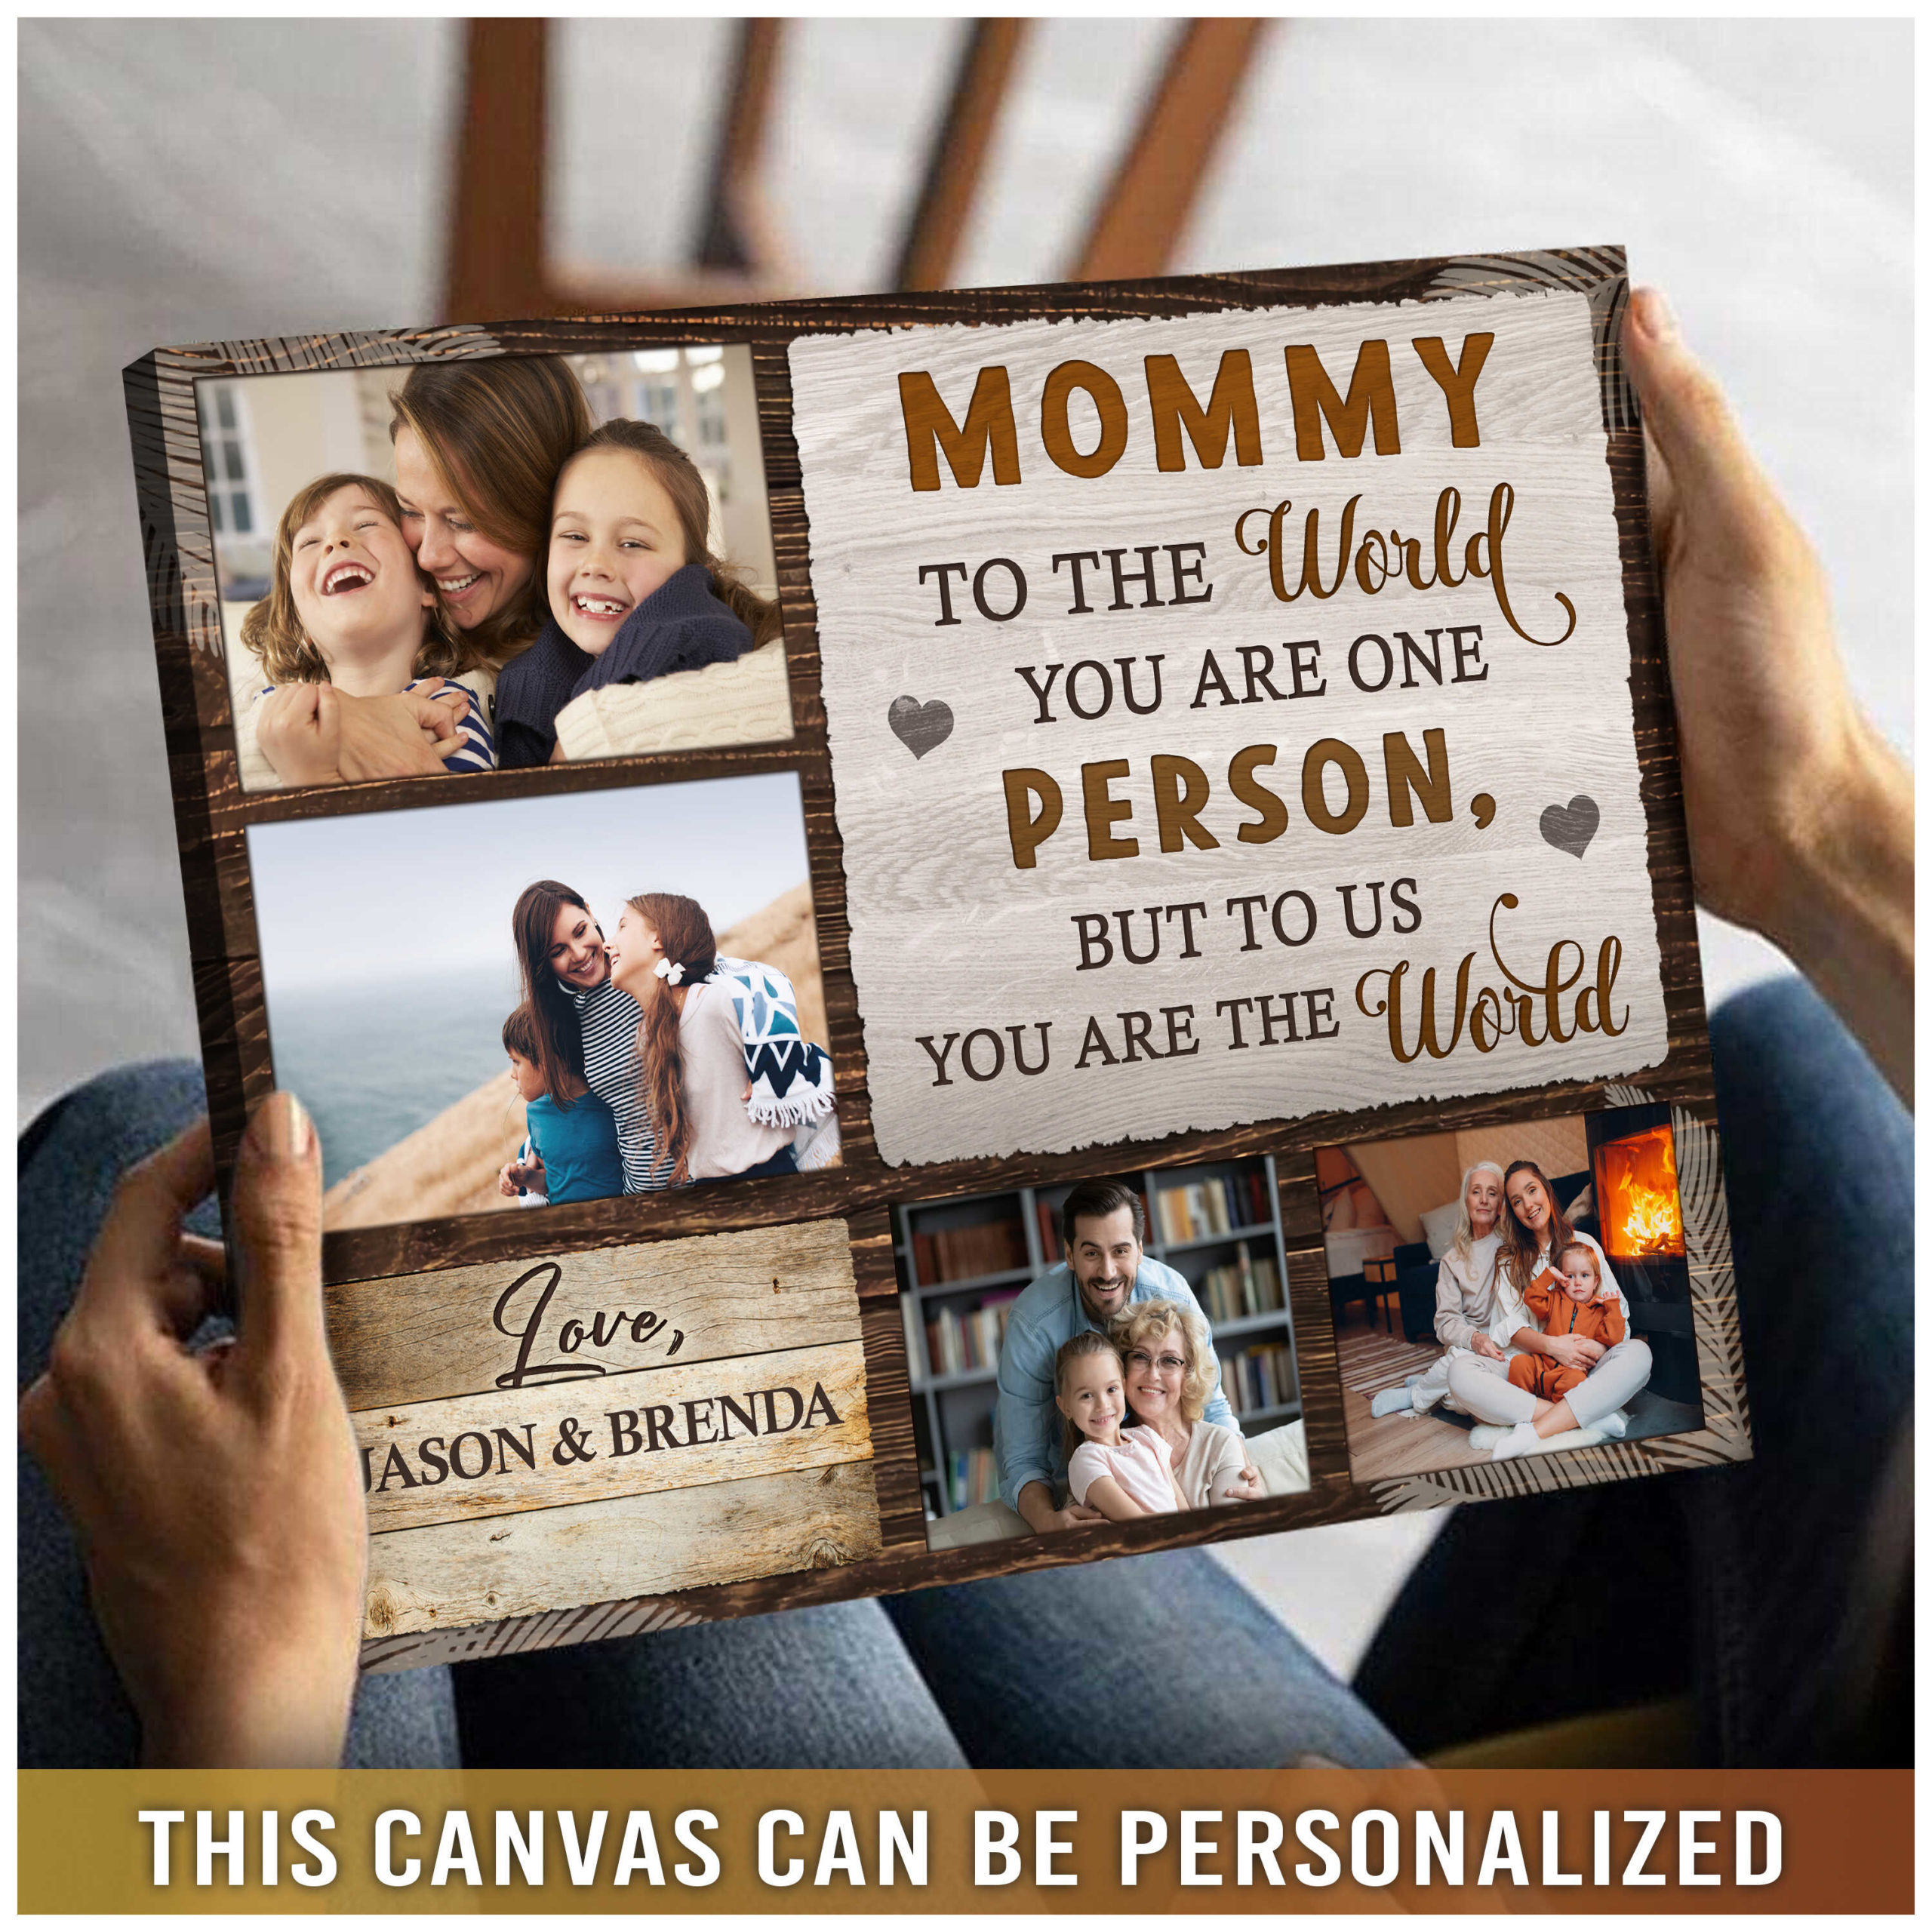 https://images.ohcanvas.com/ohcanvas_com/2022/04/18005011/mothers-day-canvas-art-gift-idea-personalized-photo-gift-for-mom-canvas01-scaled.jpg